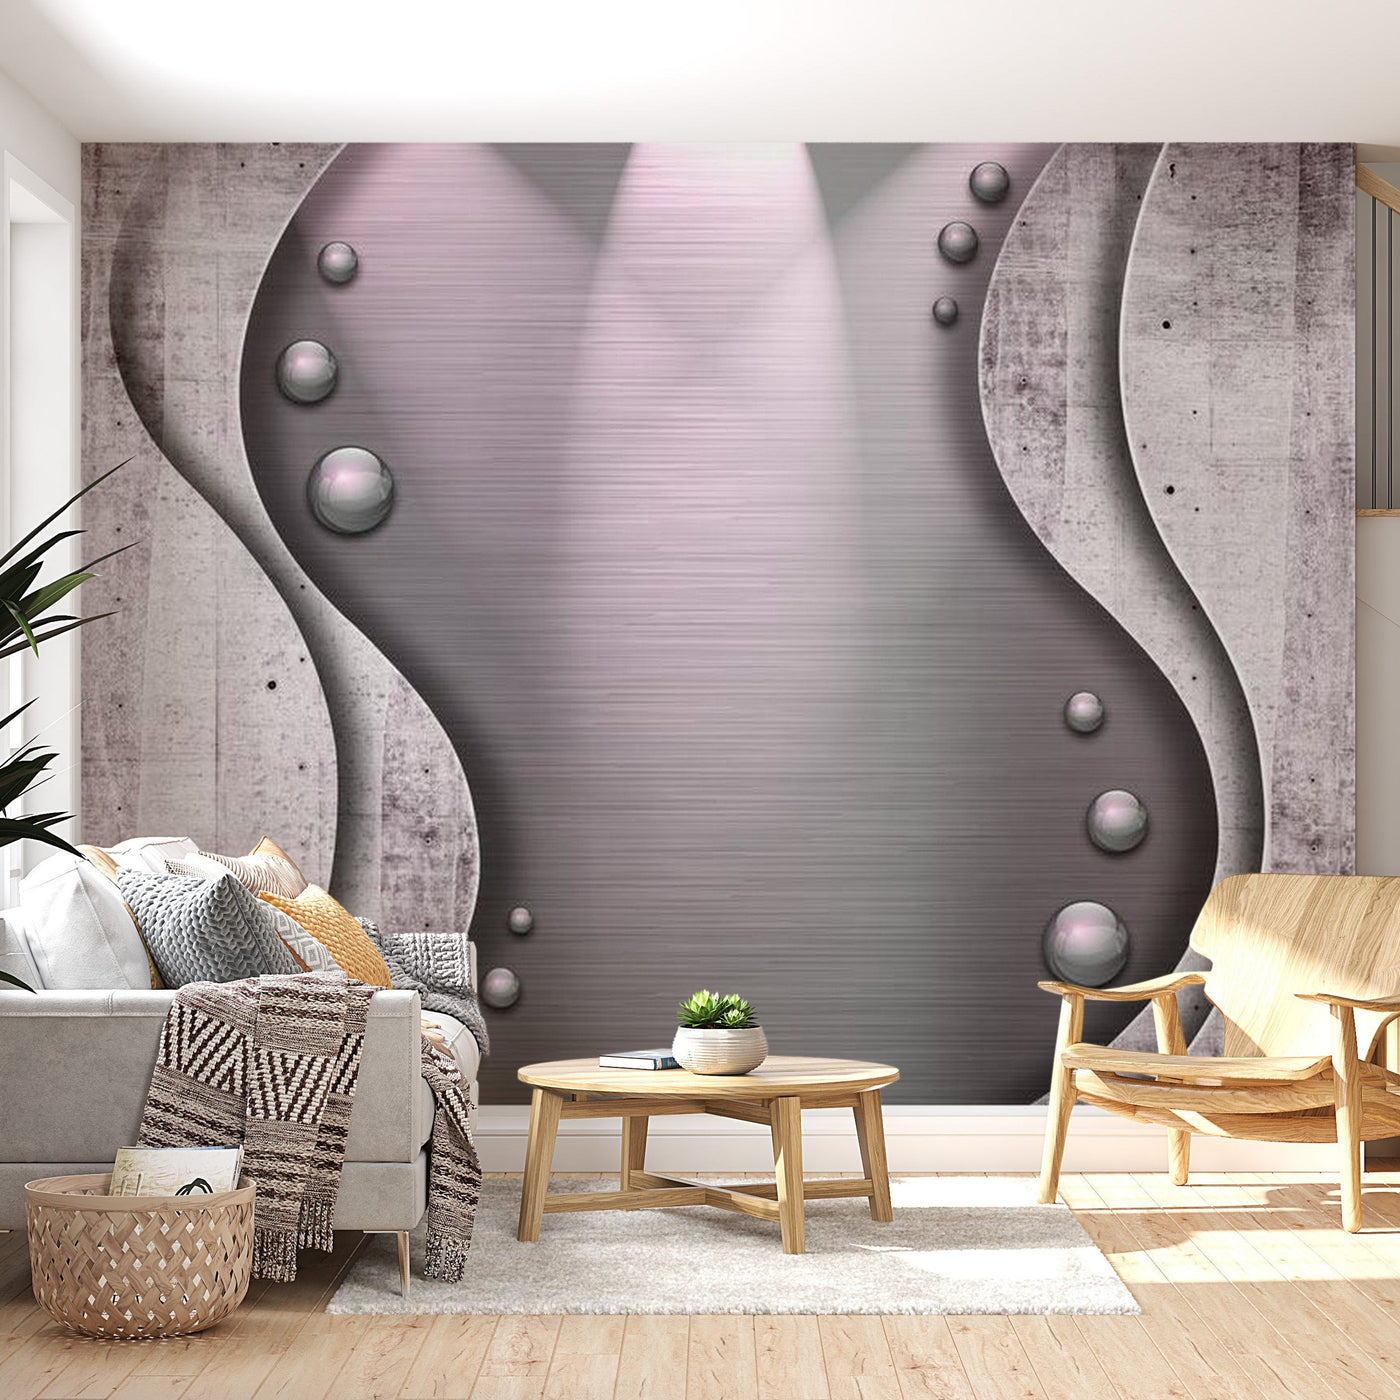 Peel & Stick Wall Mural - Metal and Concrete Fantasy - Removable Wall Decals